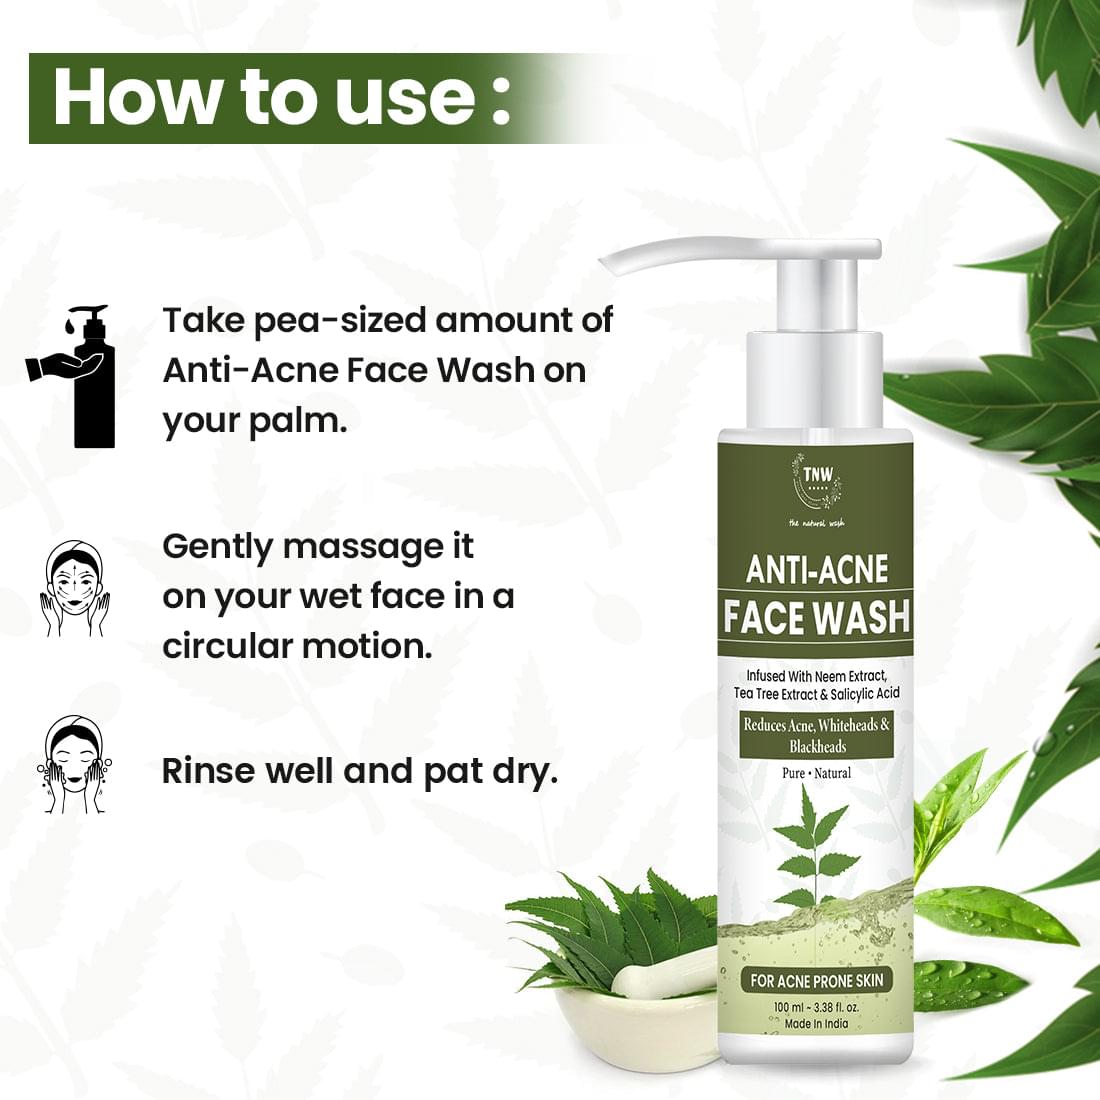 Anti-Acne Face Wash for Acne & Blemishes